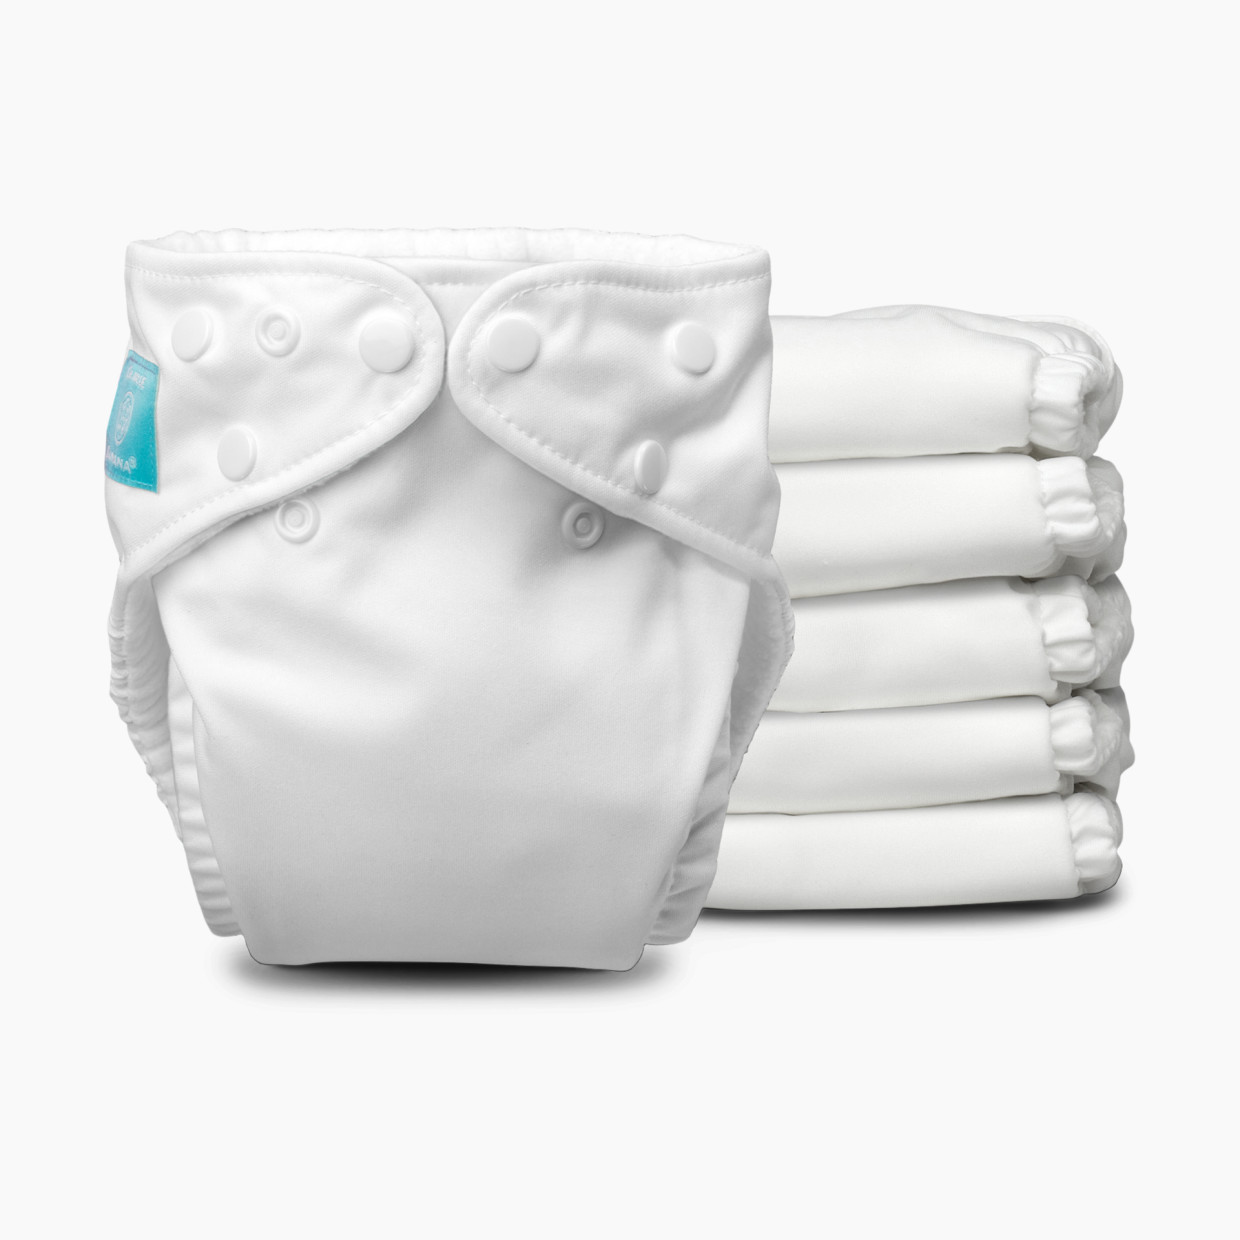 Charlie Banana One-size Reusable Cloth Diapers with 12 Reusable Inserts (6 Pack) - All White.